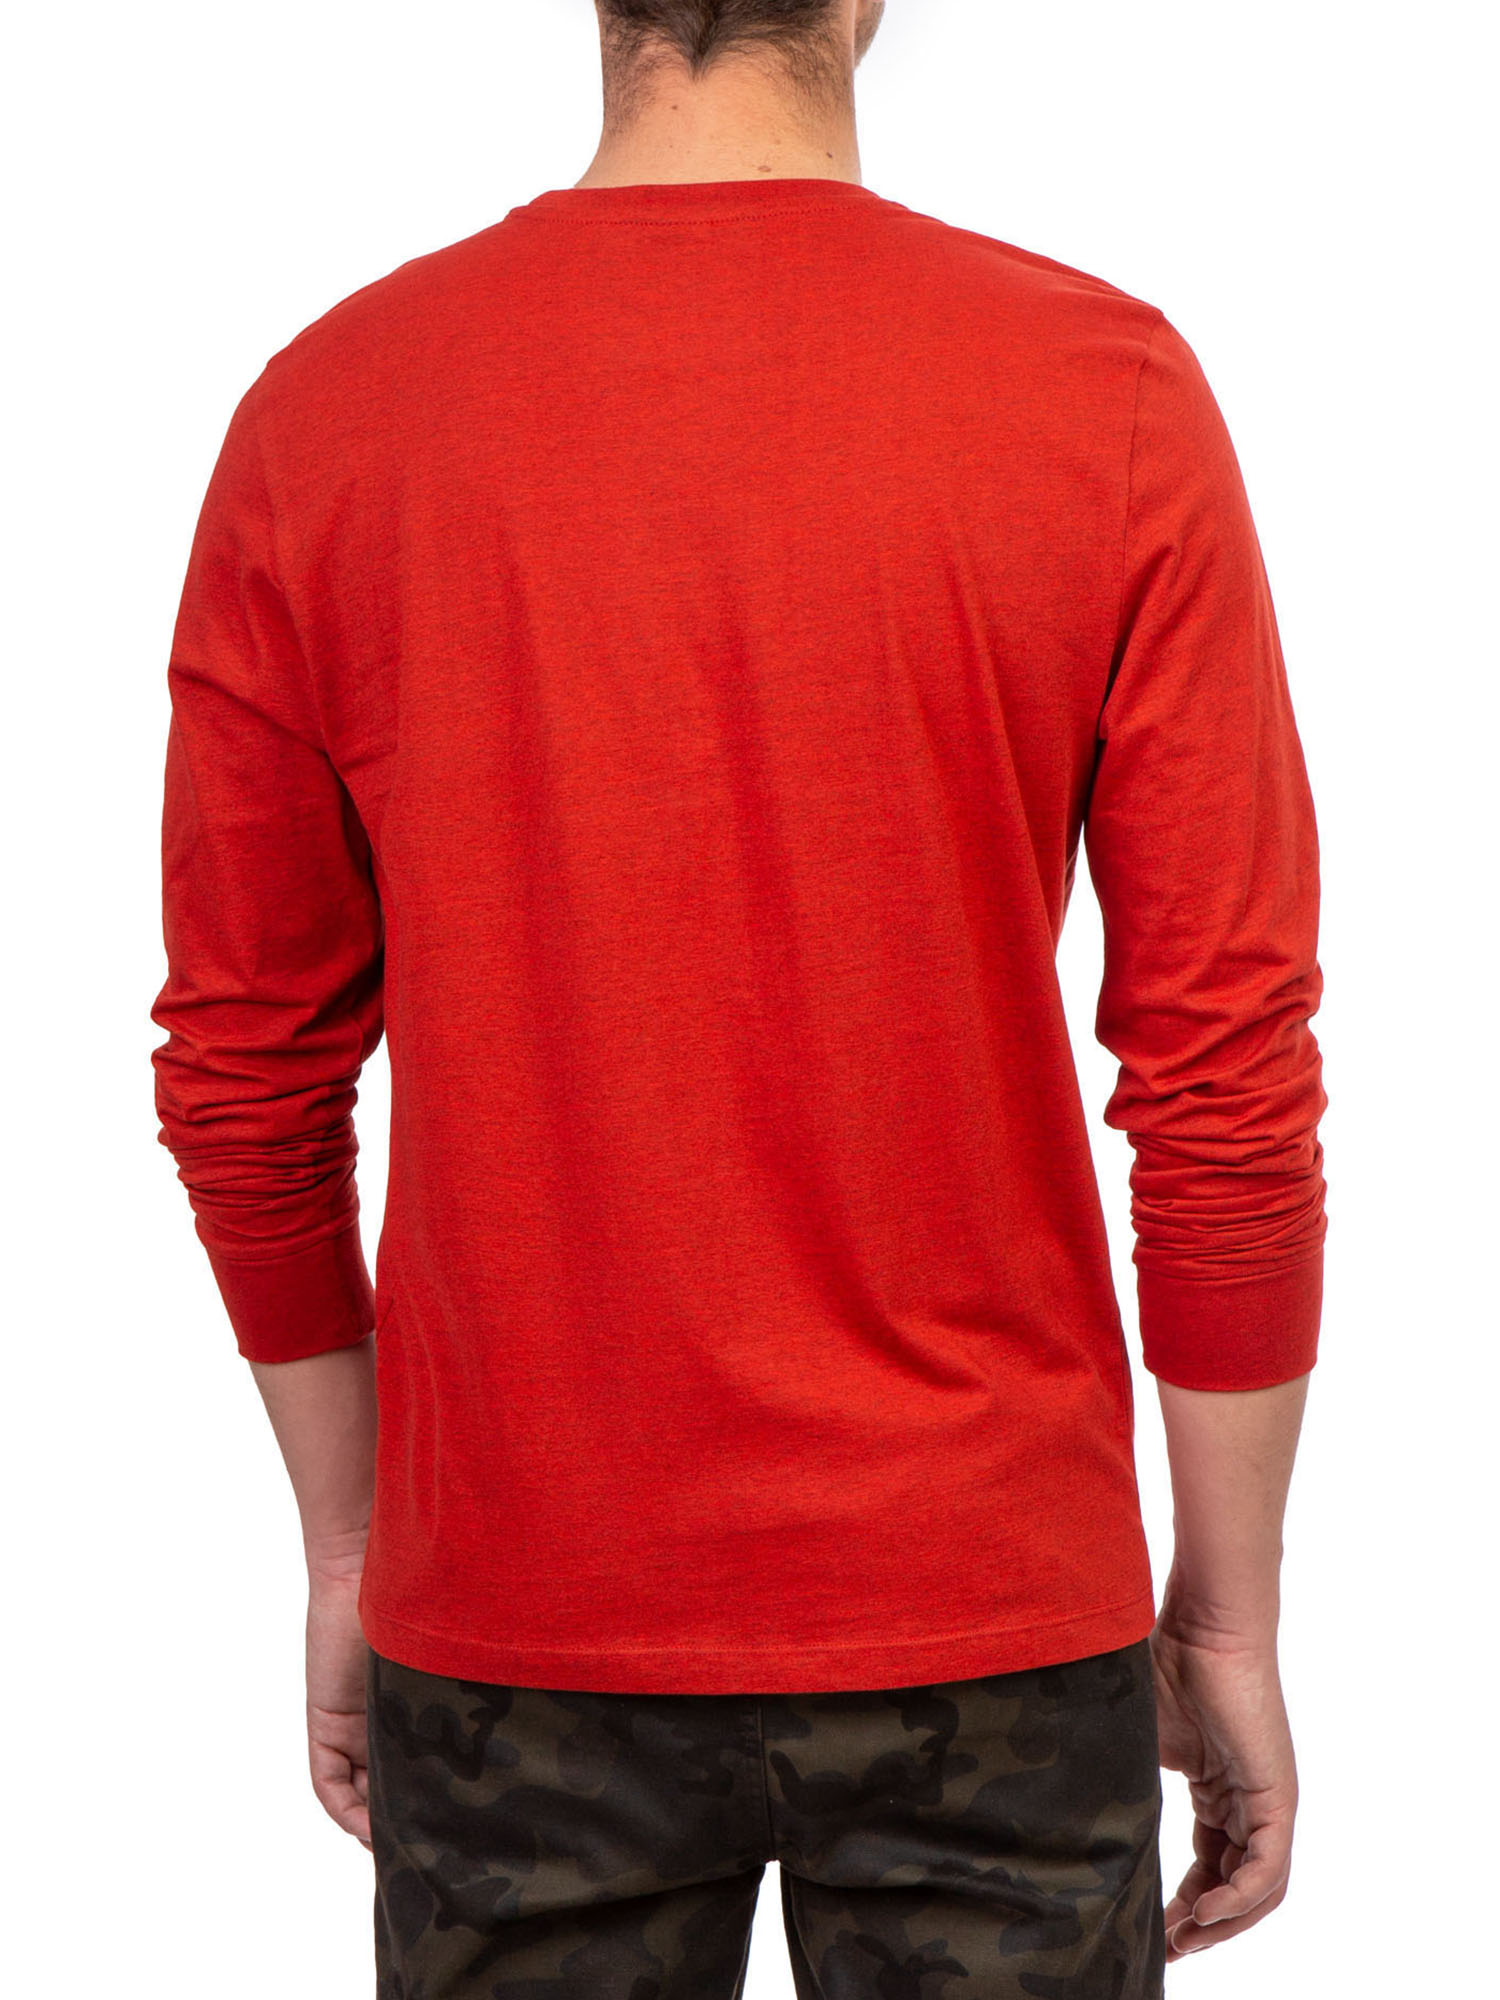 U.S. Polo Assn. Men's Long Sleeve Solid T-Shirt - image 3 of 4